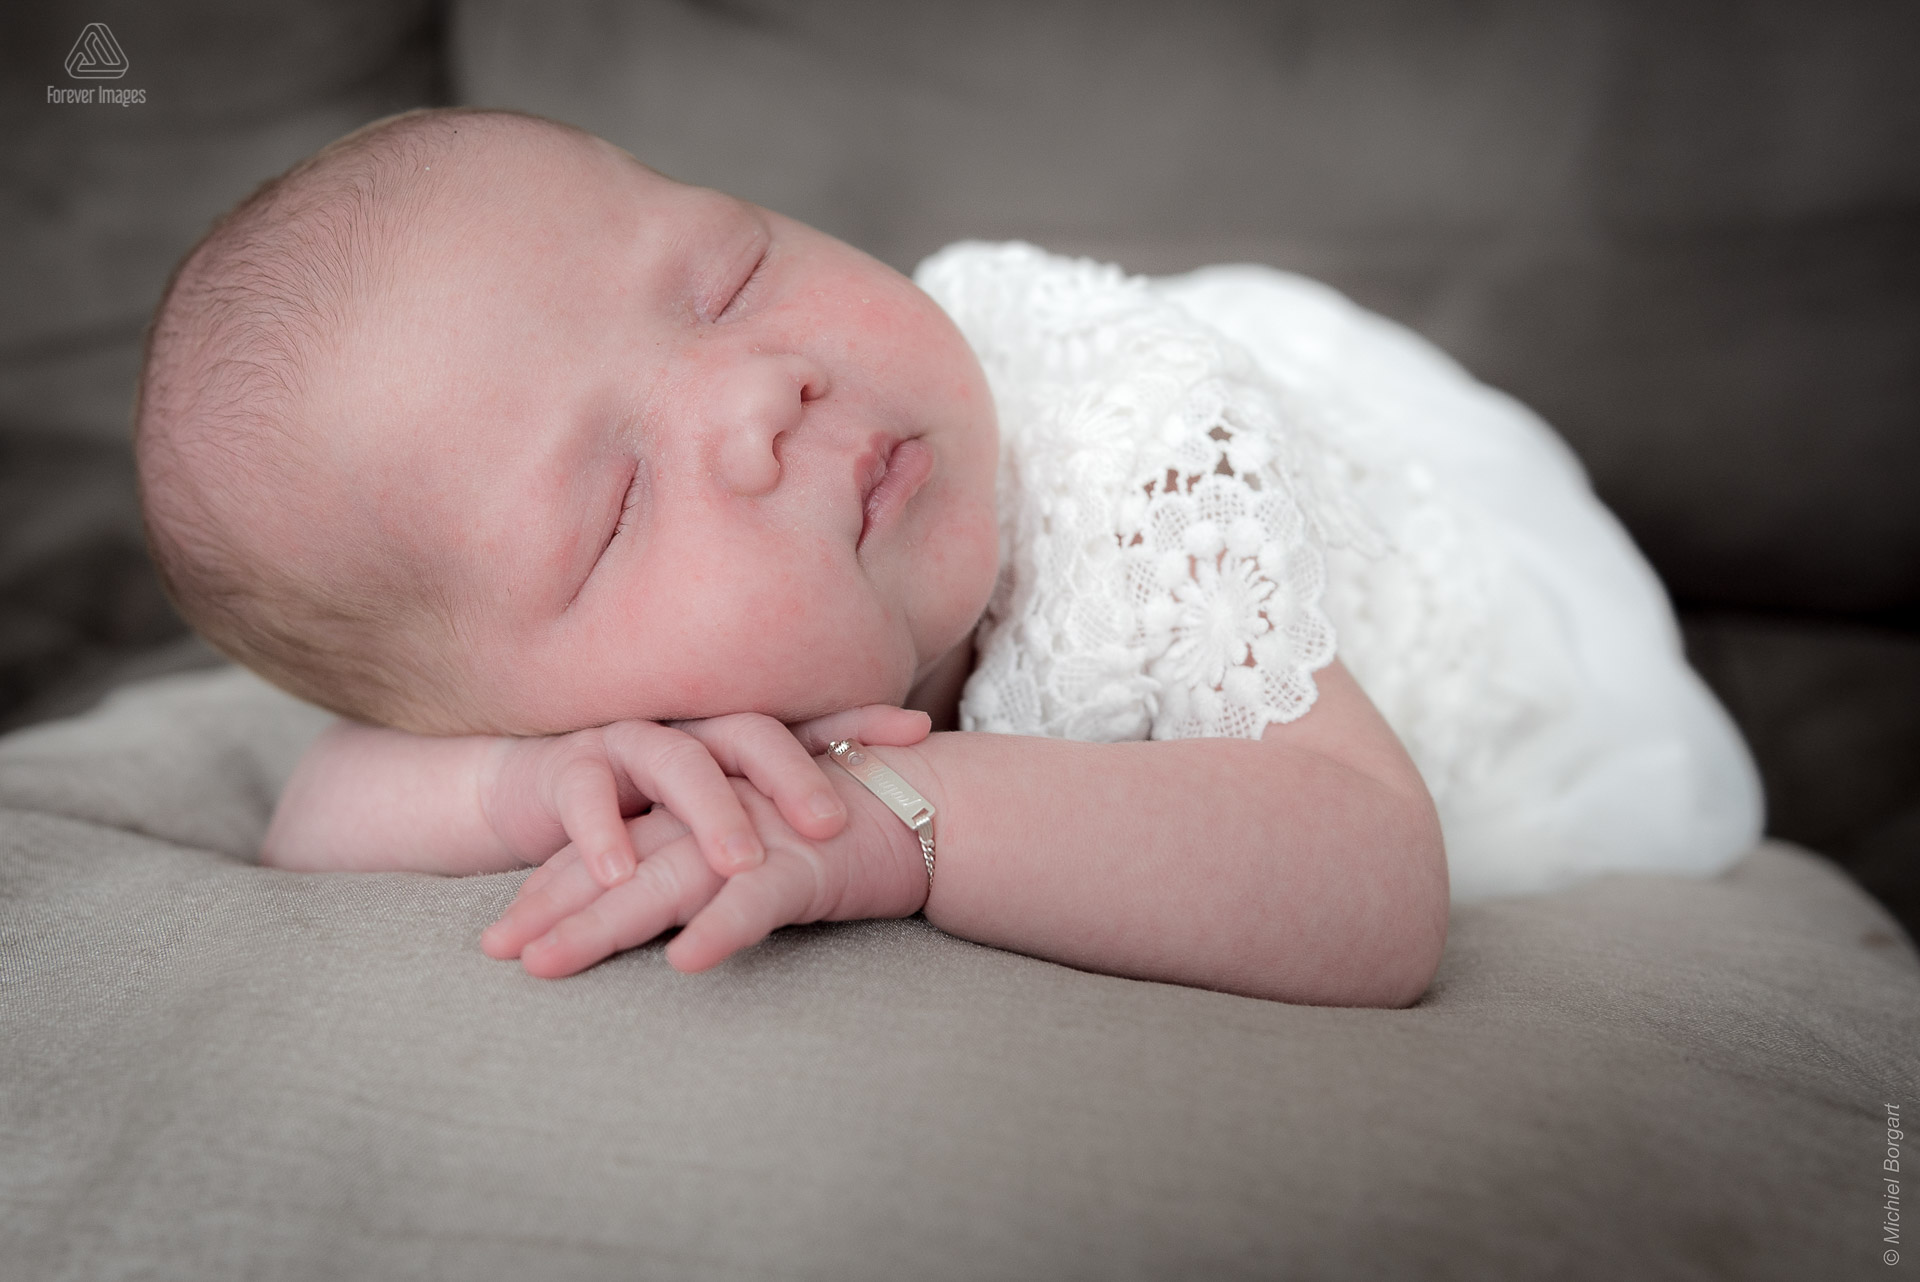 Child photo of the new born baby sleeping on pillow | Portrait Photographer Michiel Borgart - Forever Images.